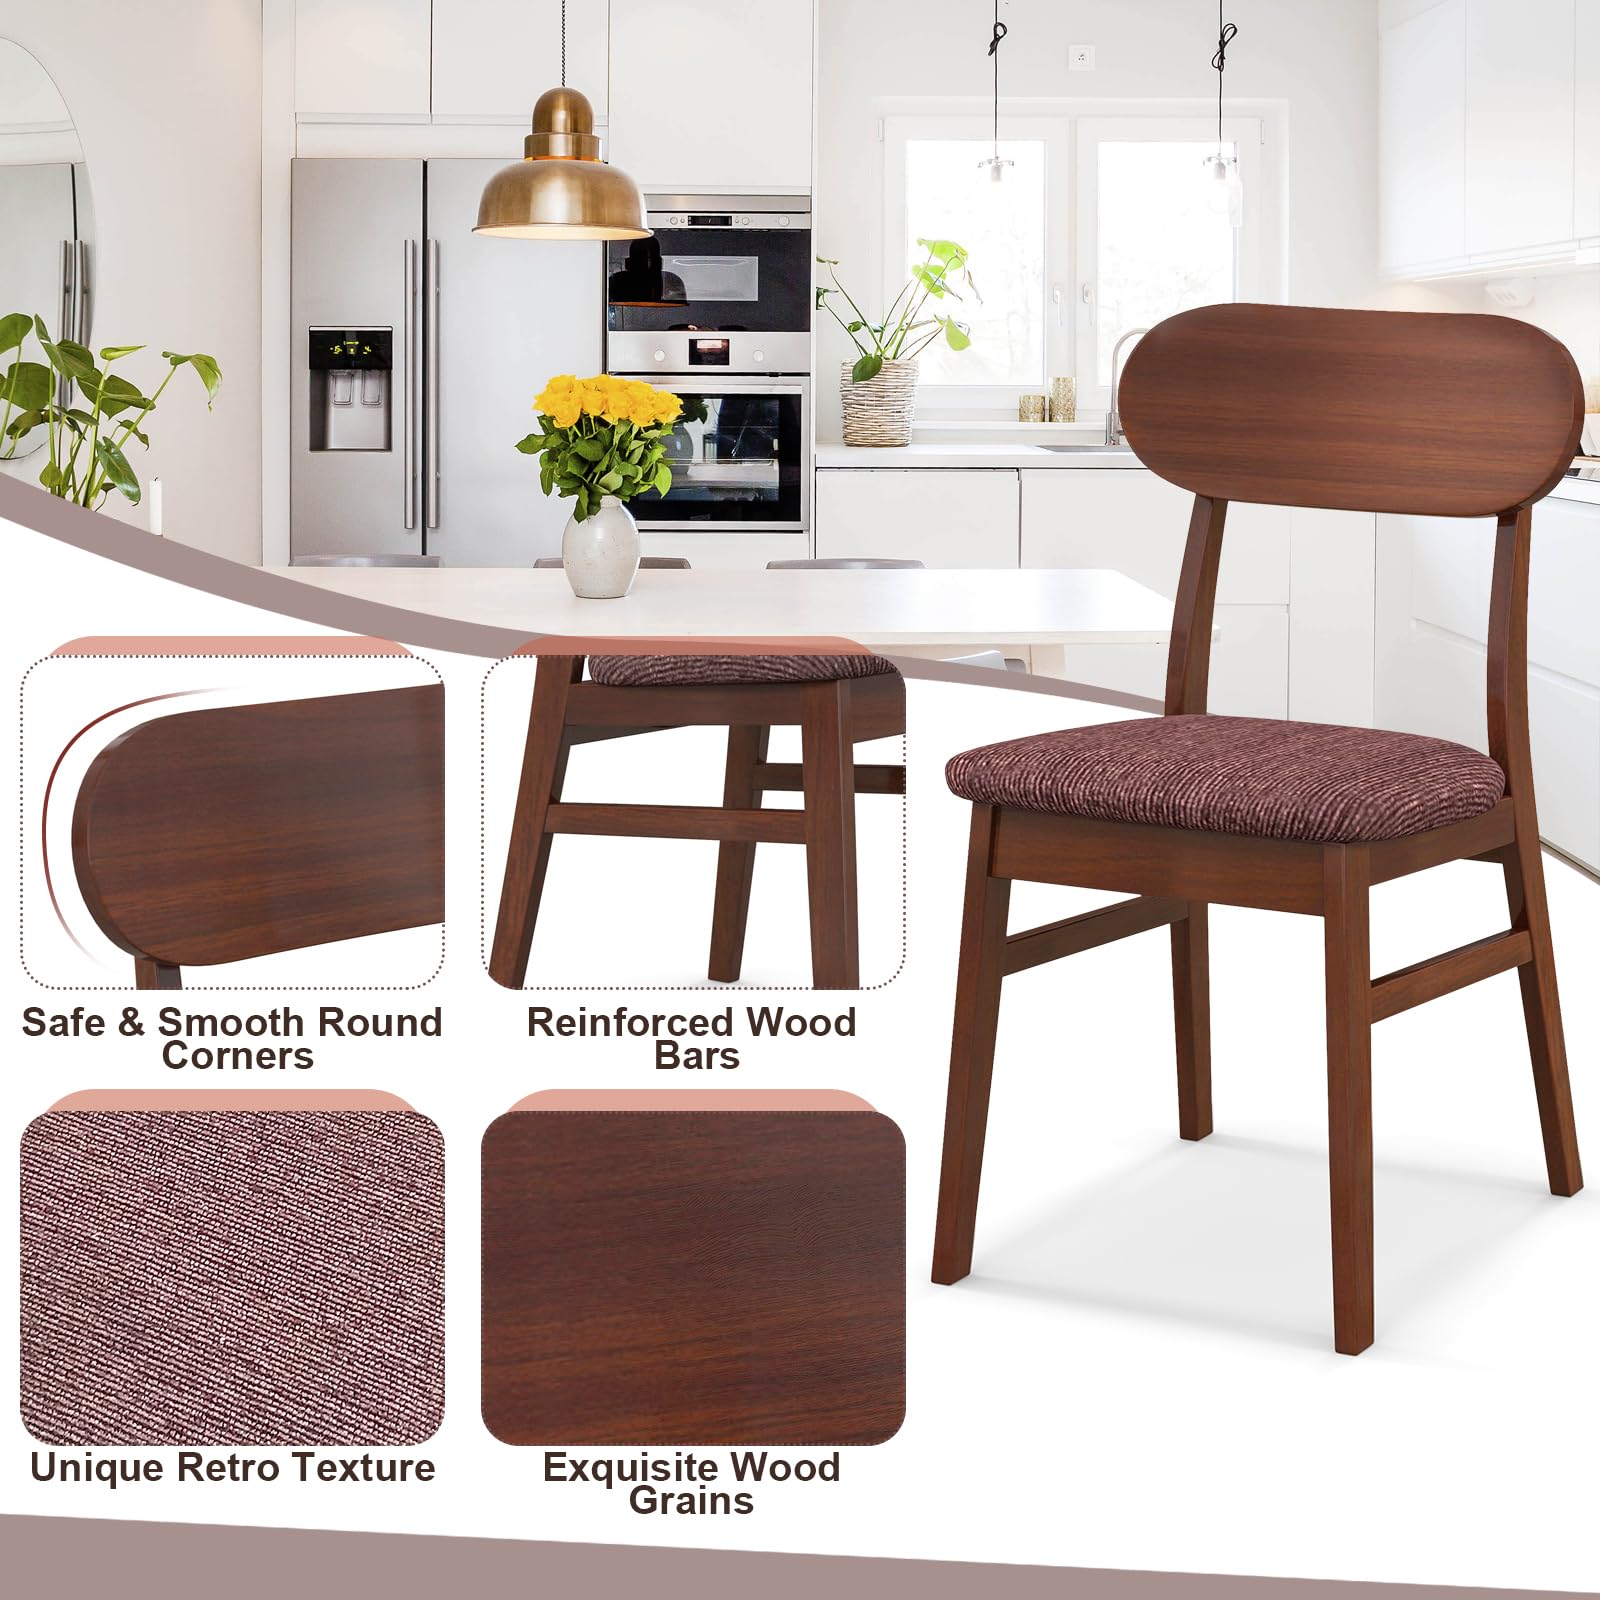 Giantex Wooden Dining Chairs Set of 4 Walnut, Farmhouse Kitchen Chairs with Padded Seat